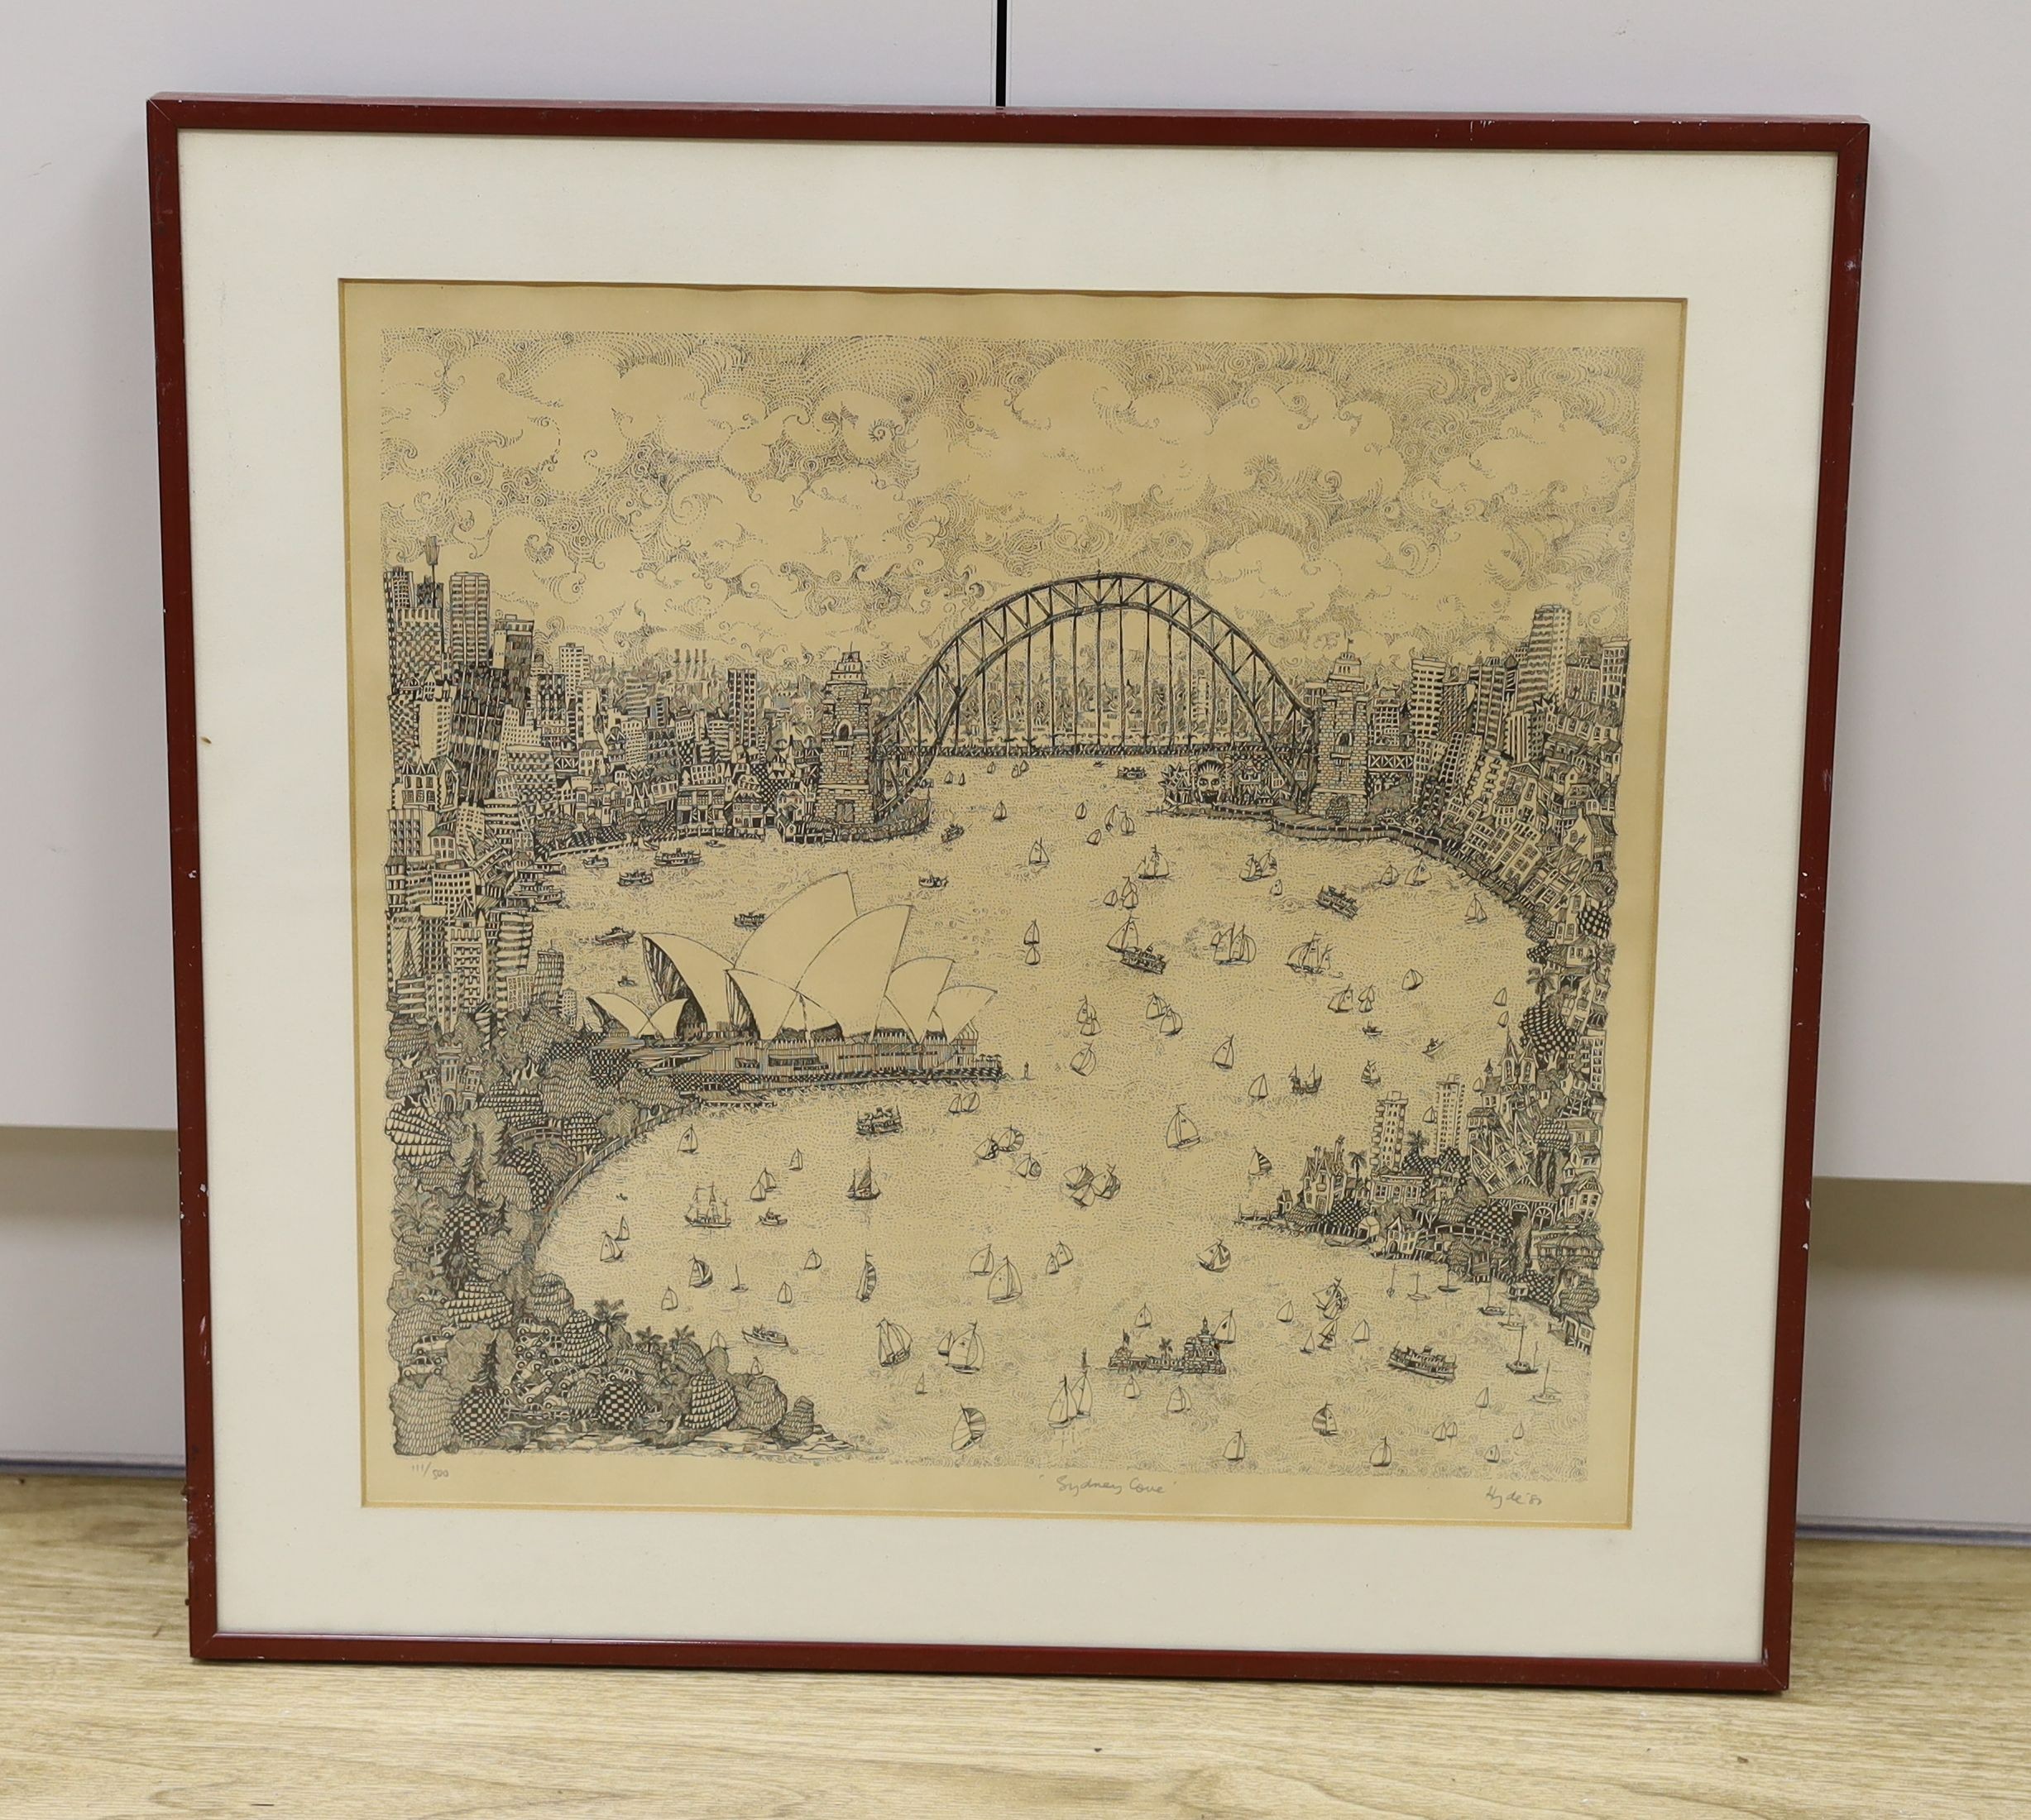 Greg Hyde, limited edition print, Sydney Cove, signed, dated 1981 and numbered 111/500, 39 x 40cm